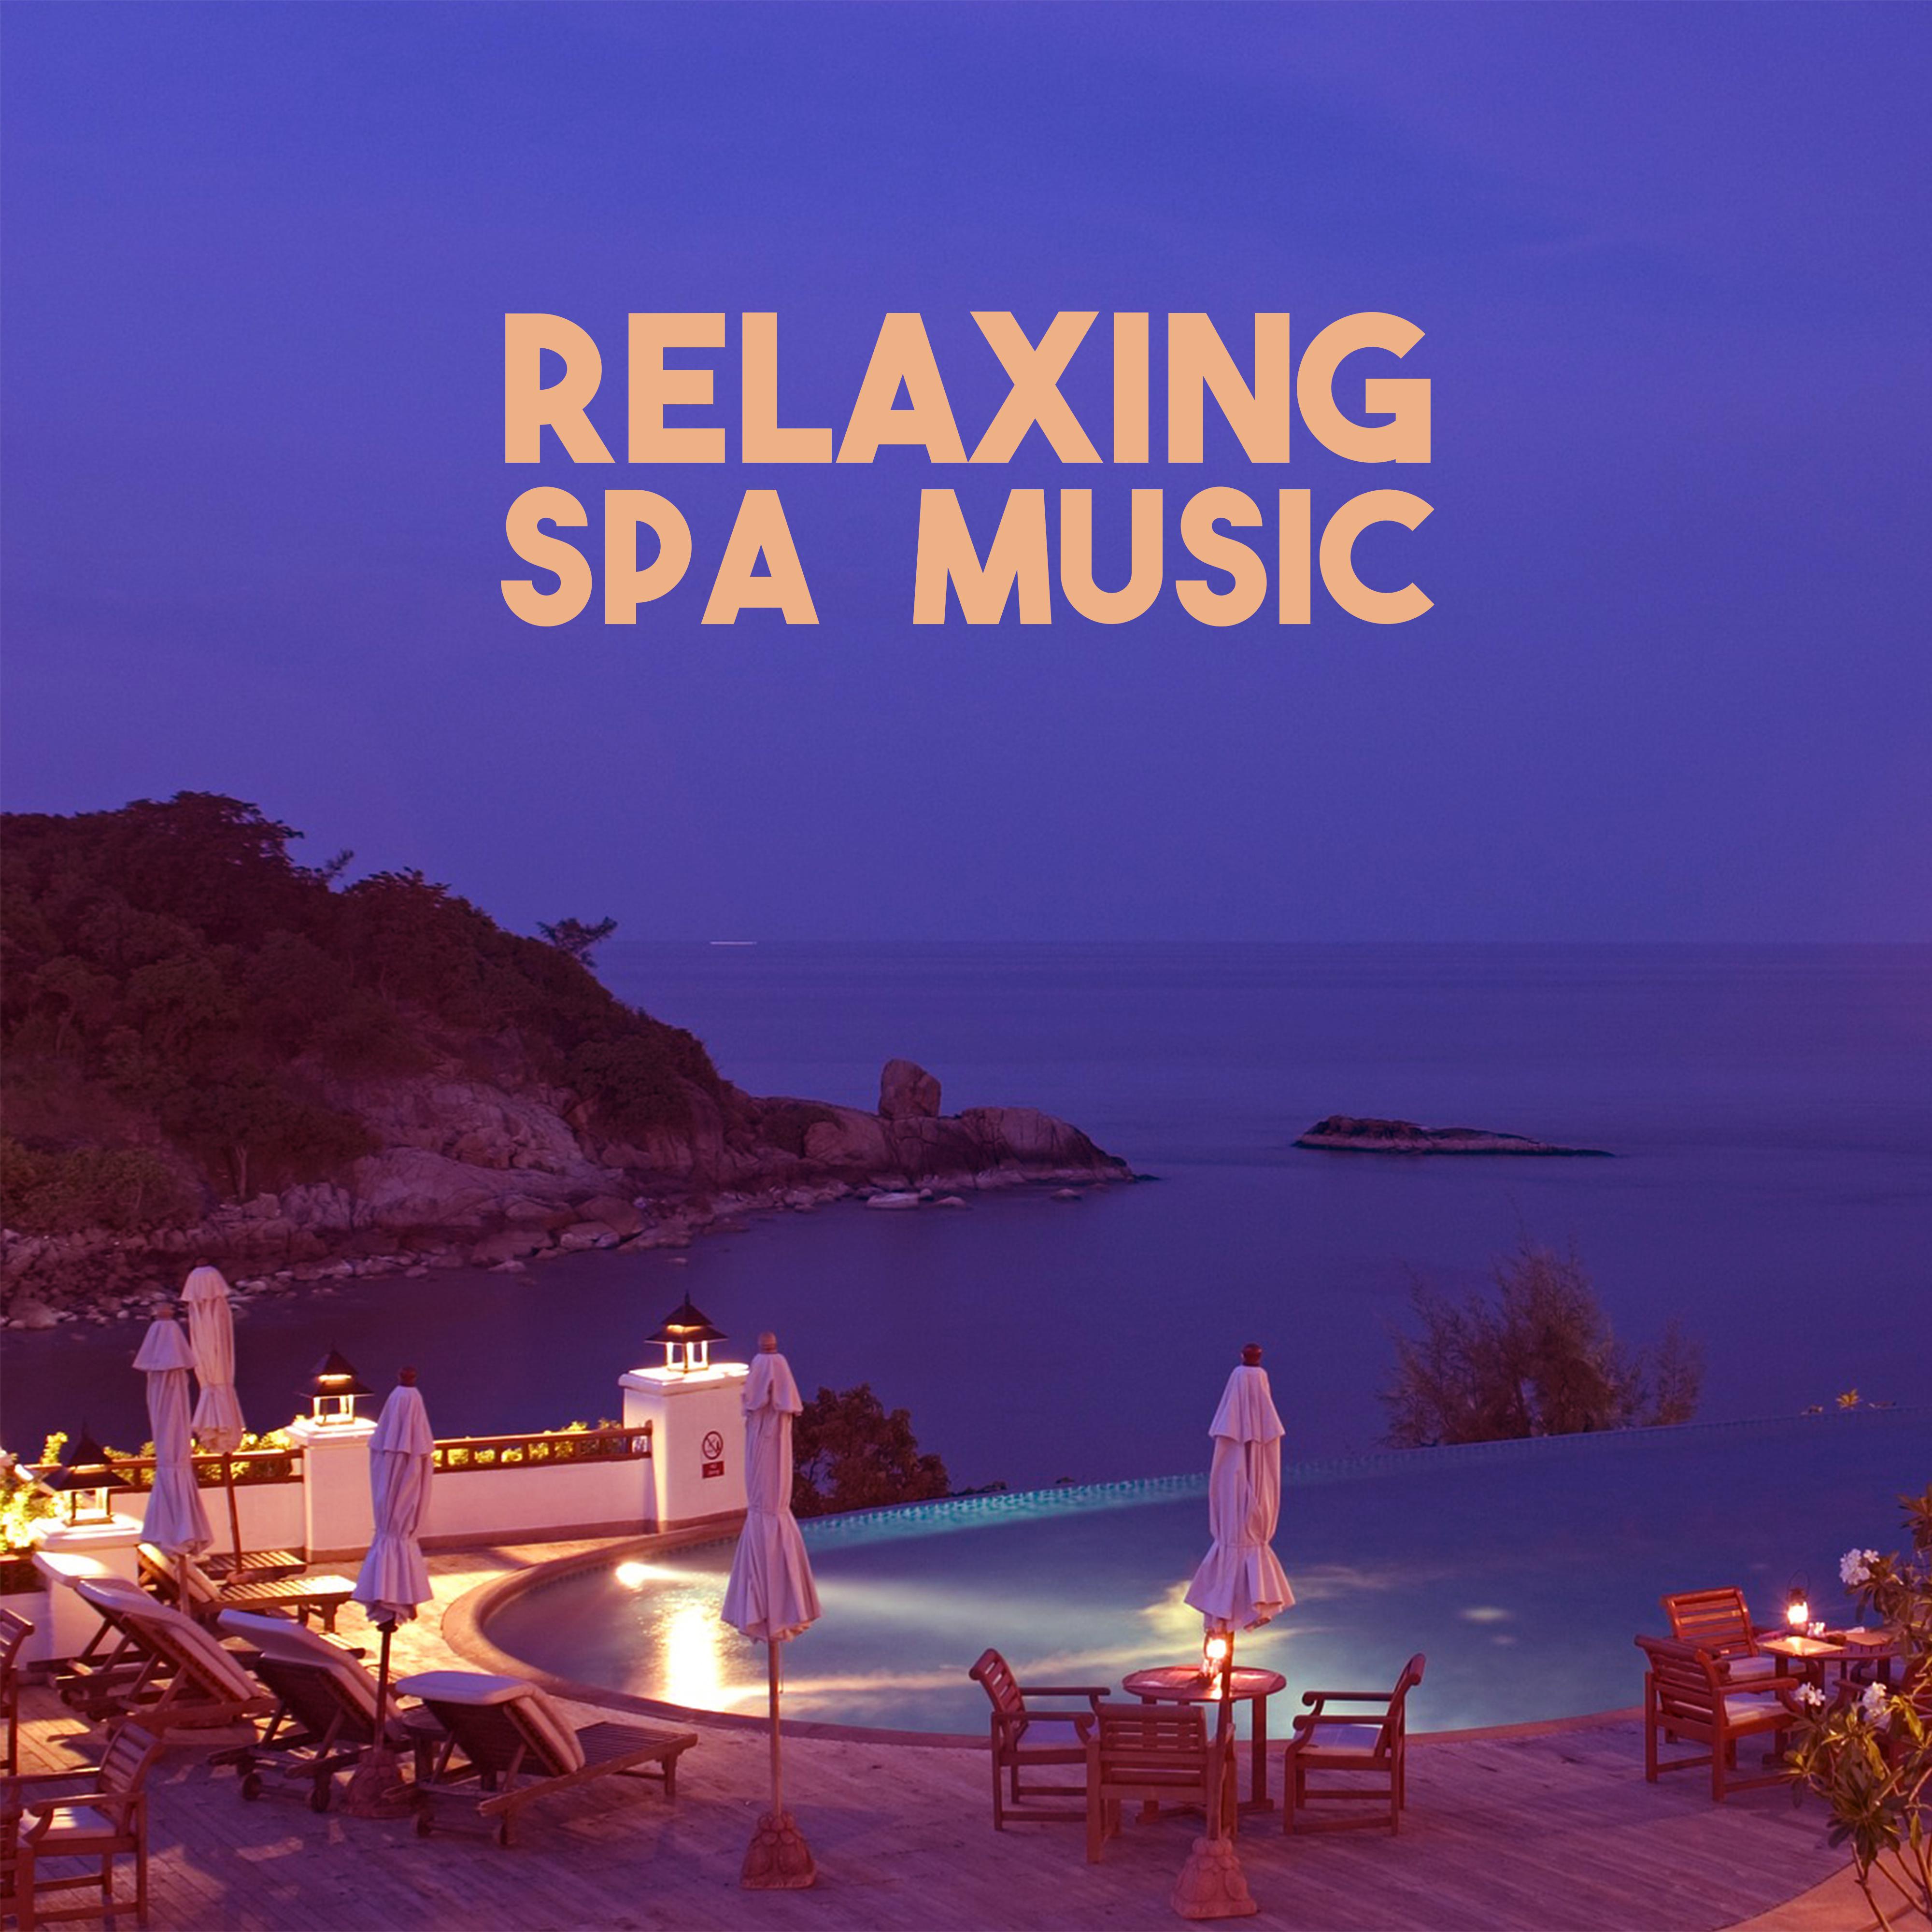 Relaxing Spa Music  Soft Music for Massage, Sauna Relaxation, Spa  Wellness, New Age Music